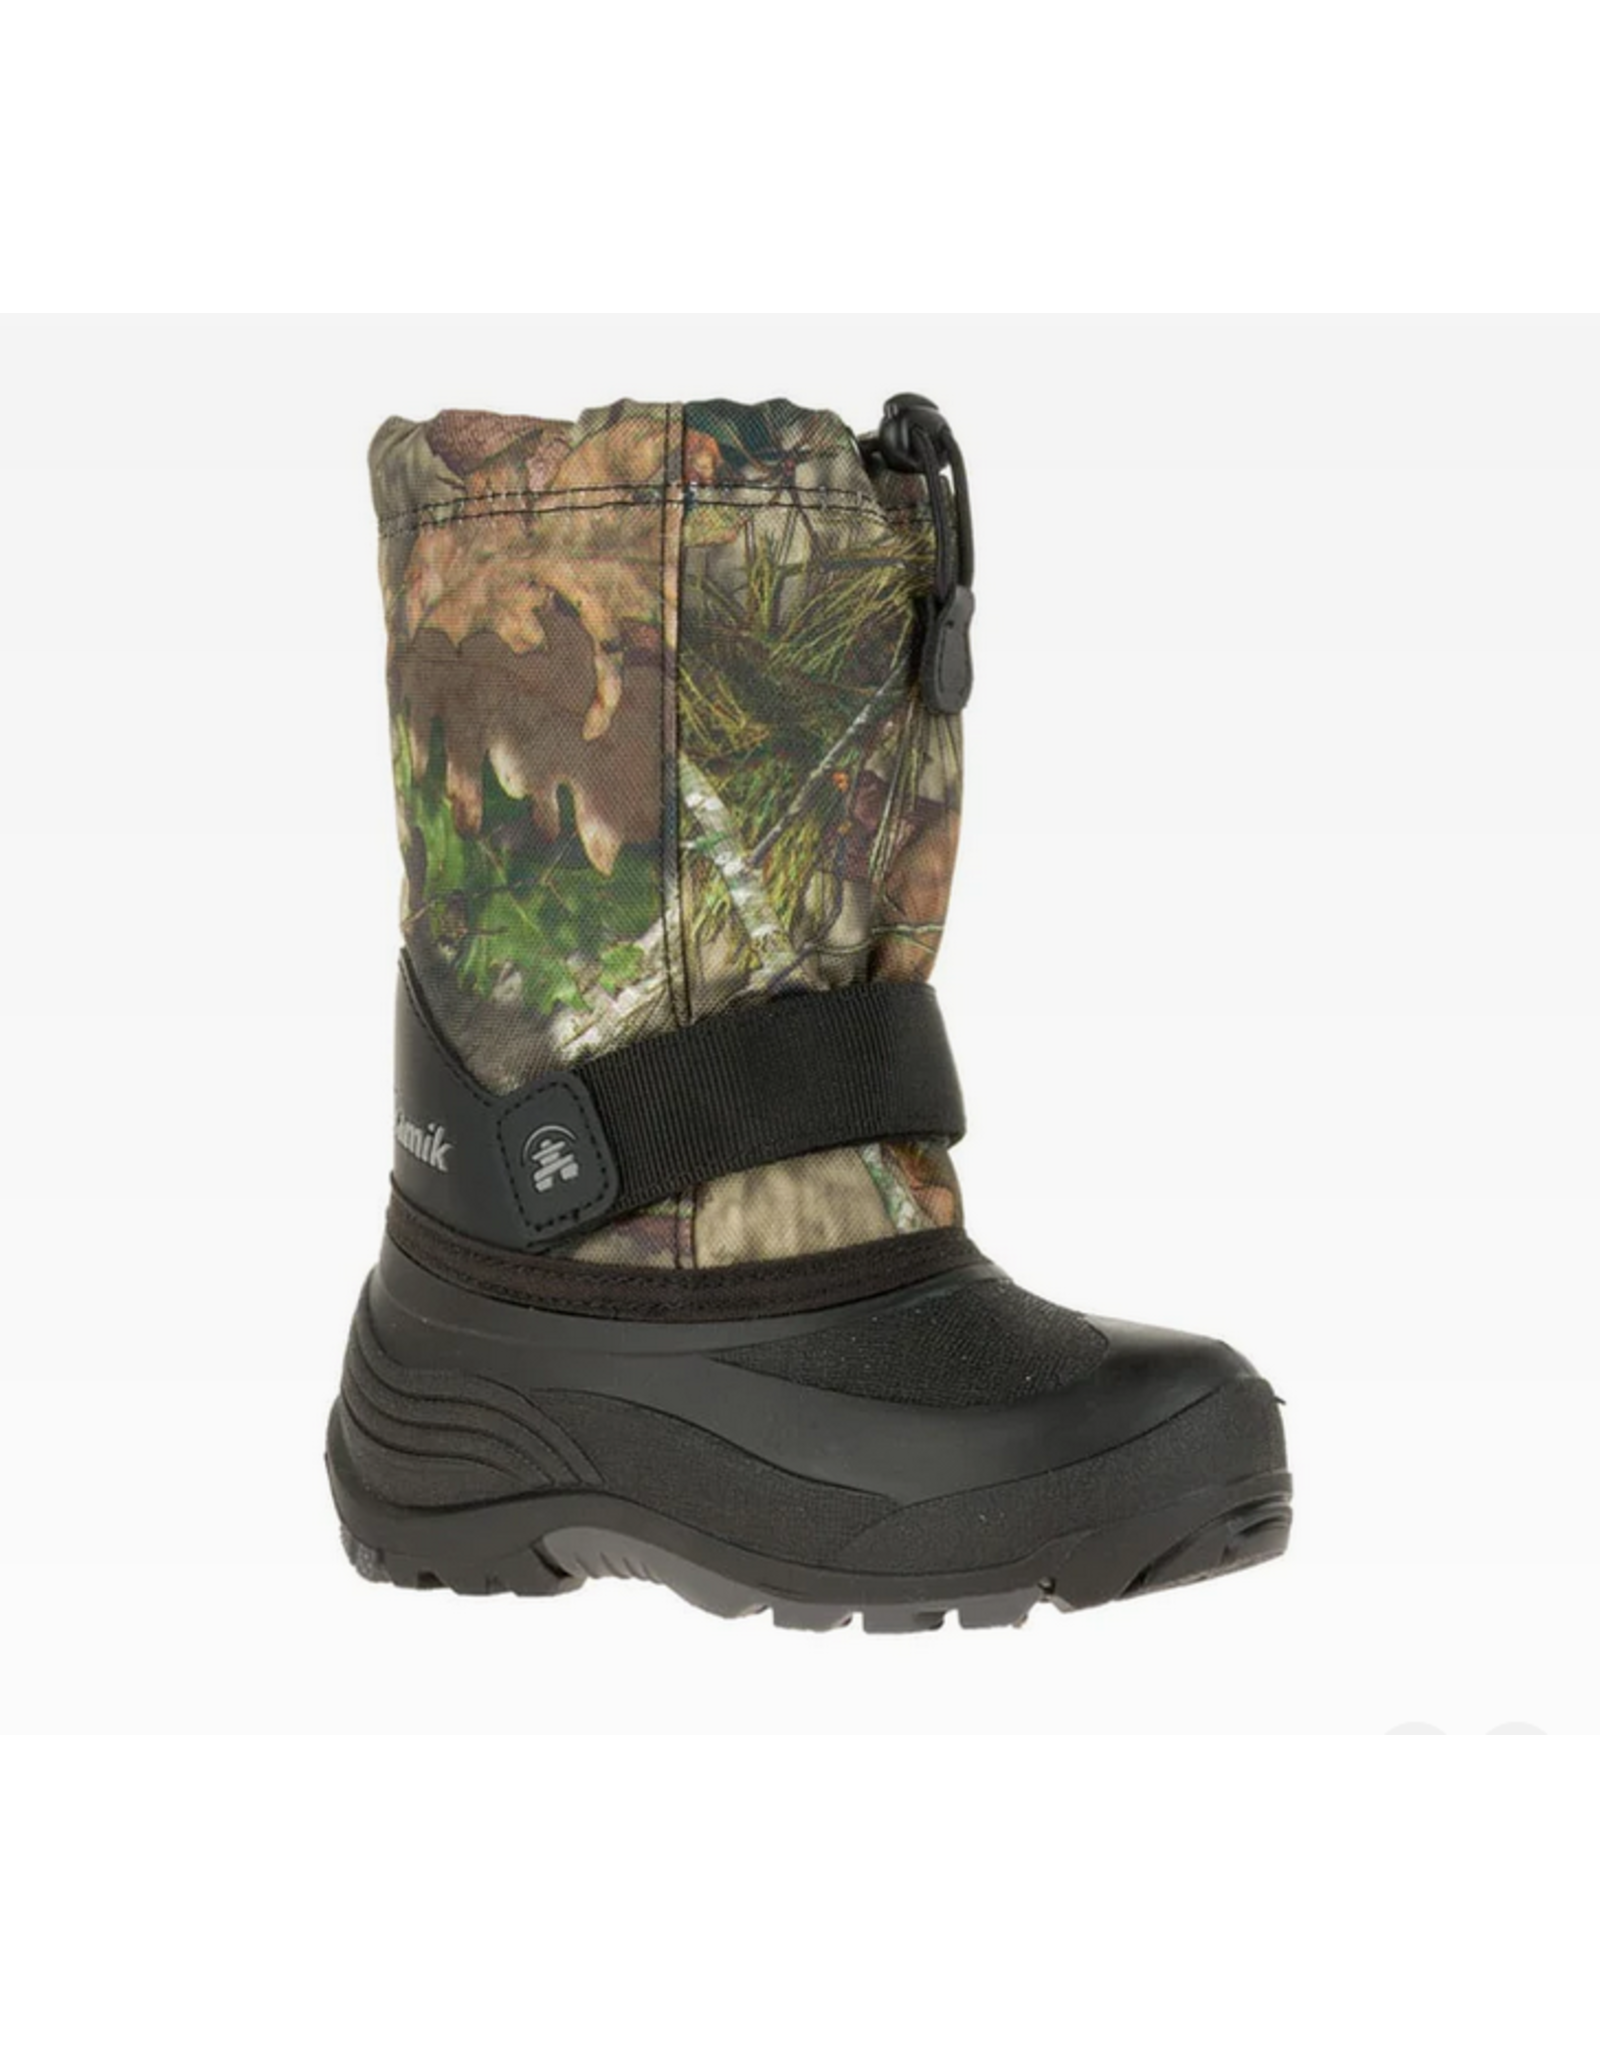 Kamik Rocket (Toddler/Youth) Mossy Oak Country Boots